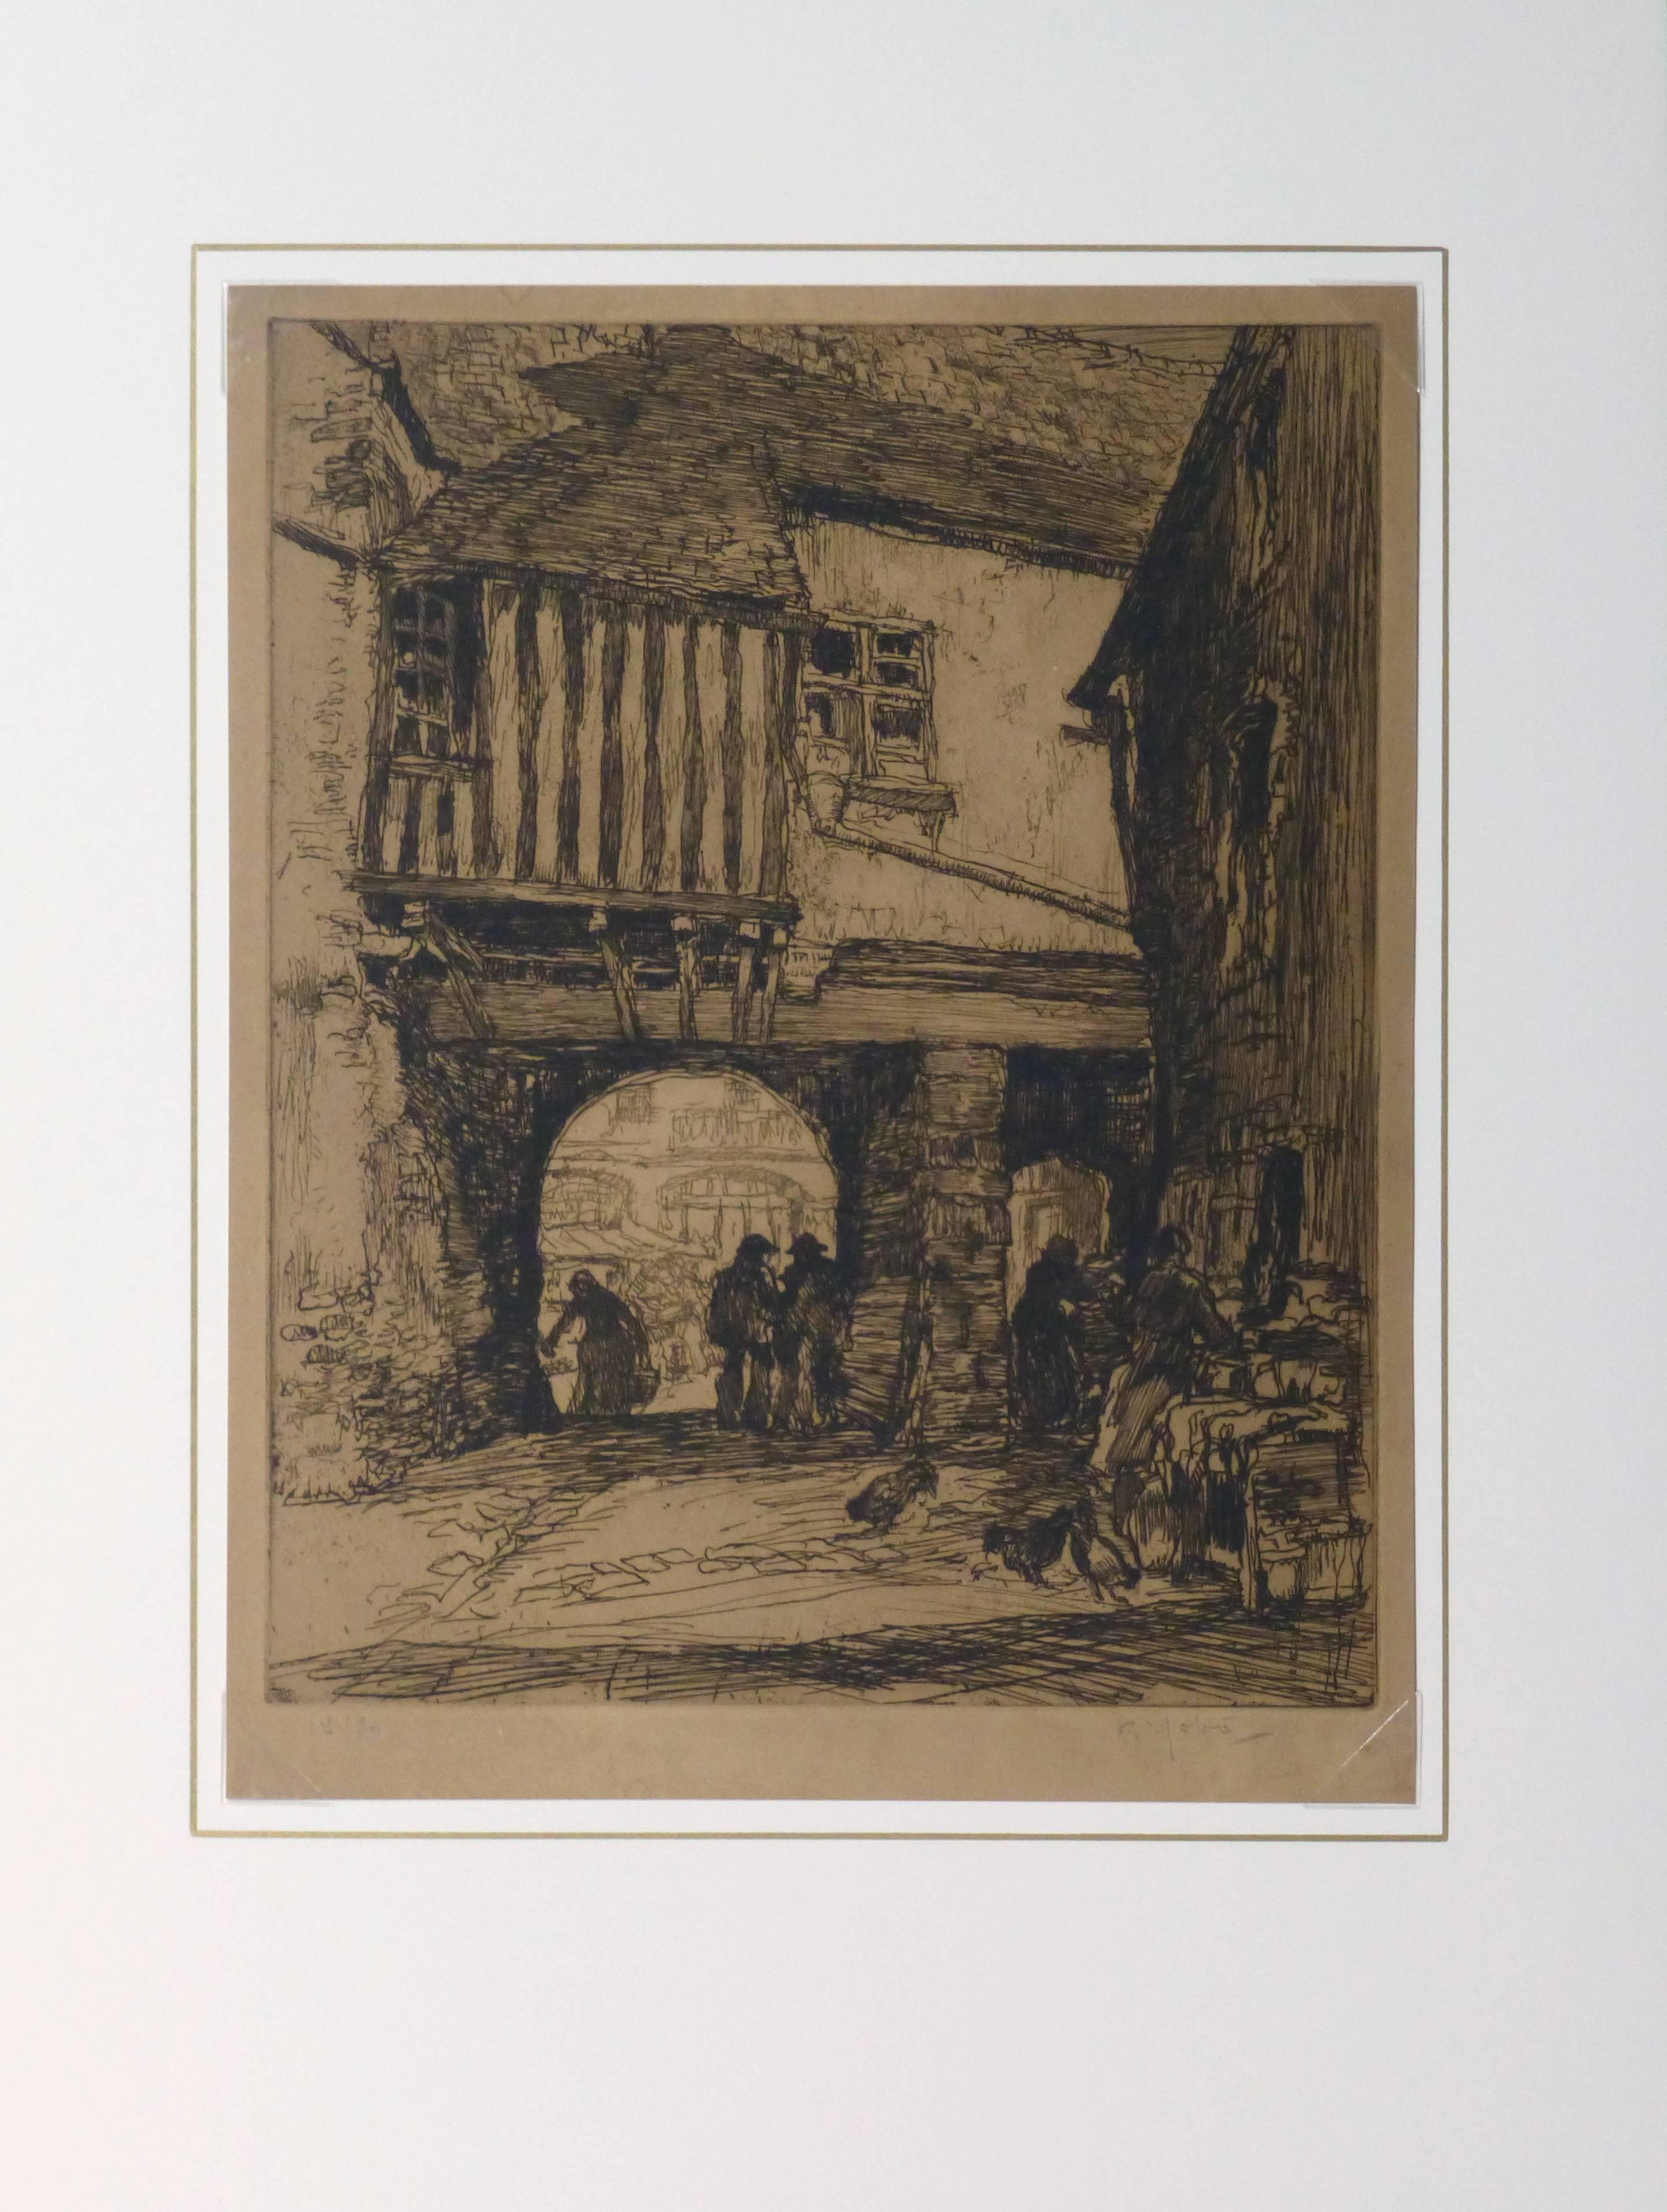 Etching - Market Day - Black Landscape Print by Georges Gobo